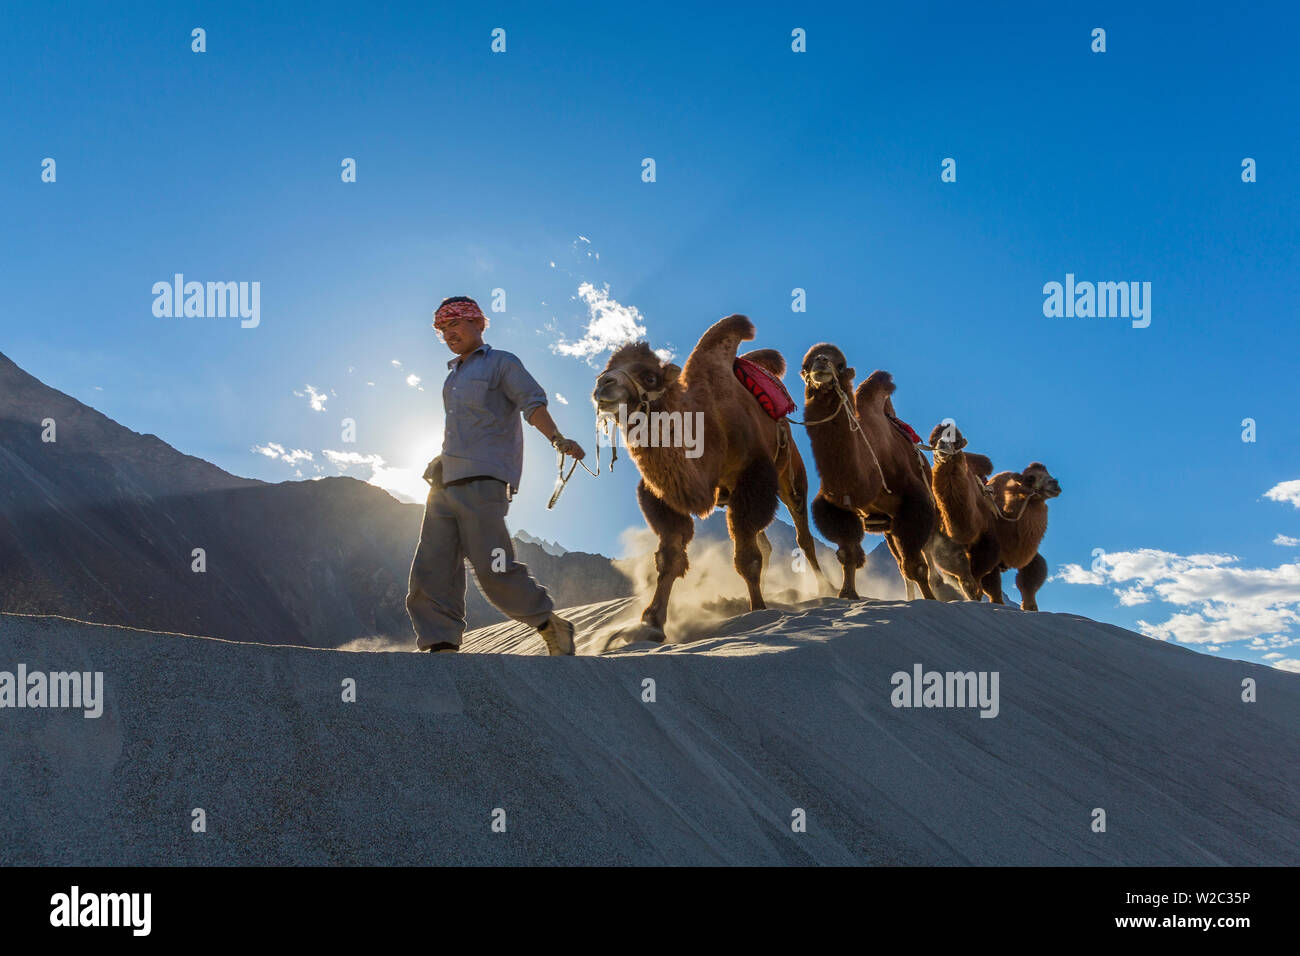 Bactrian or double humped camels, Nubra Valley, Ladakh, India Stock Photo